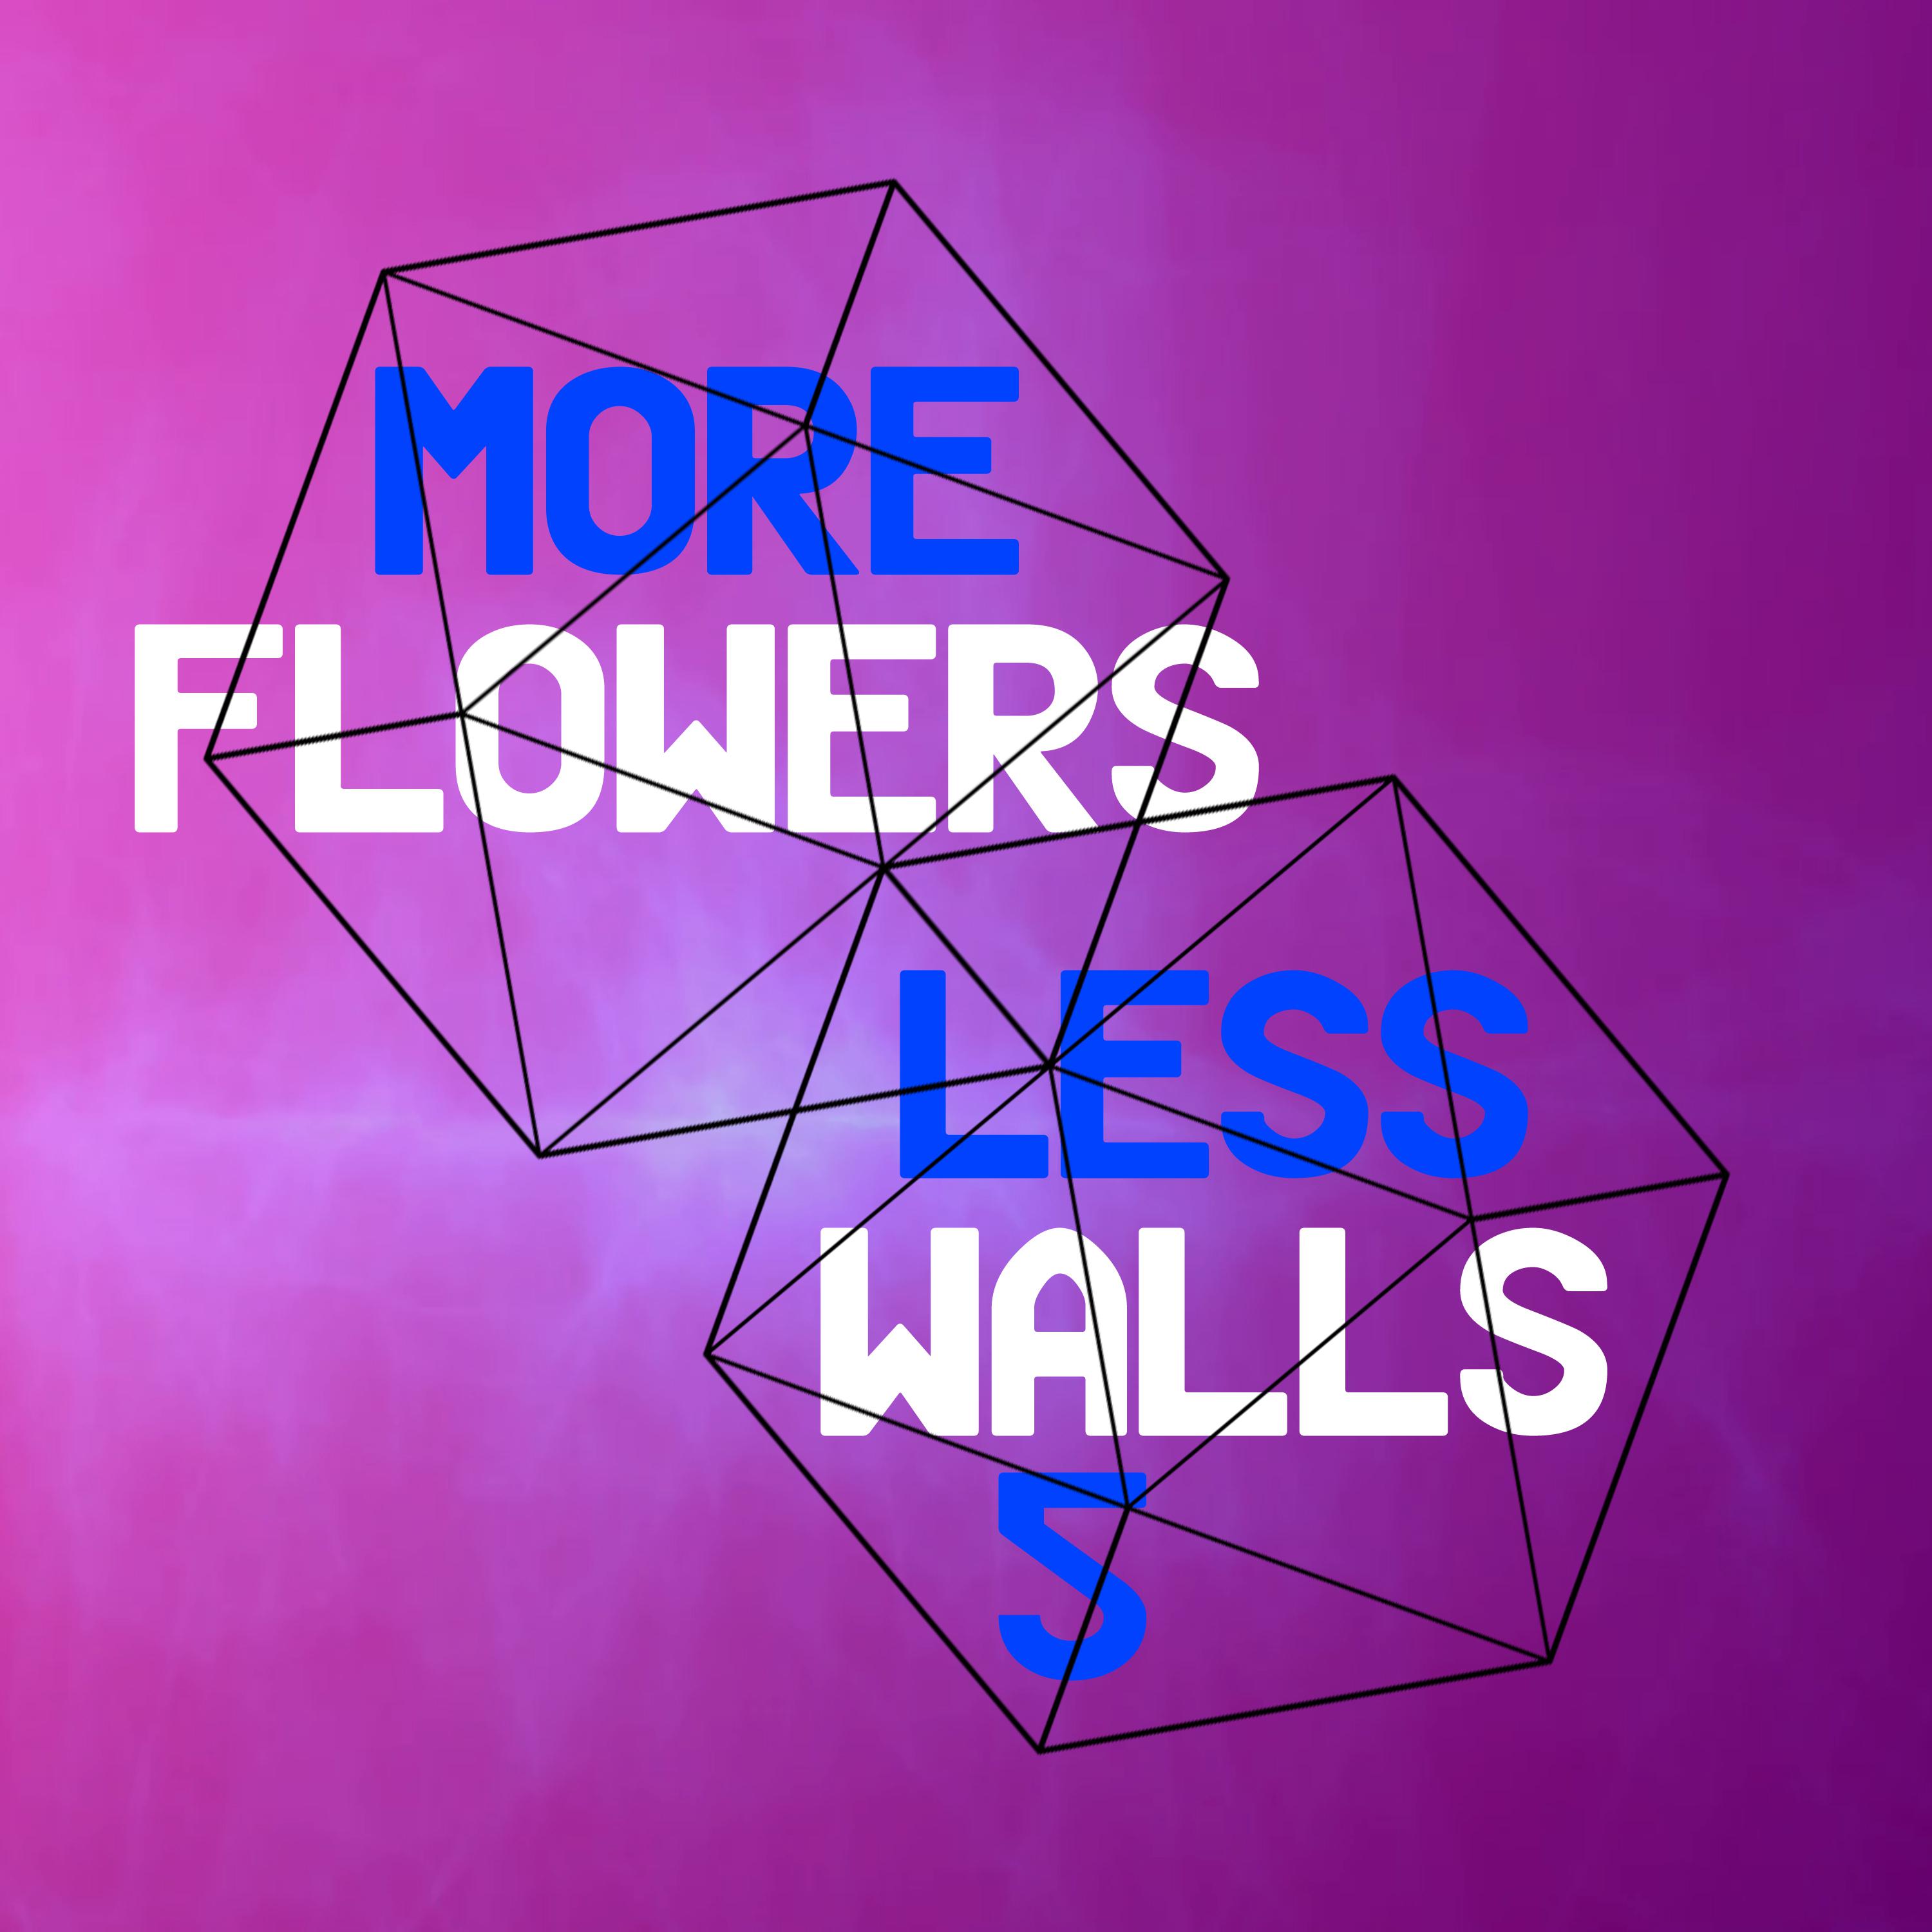 More Flowers, Less Walls! 5